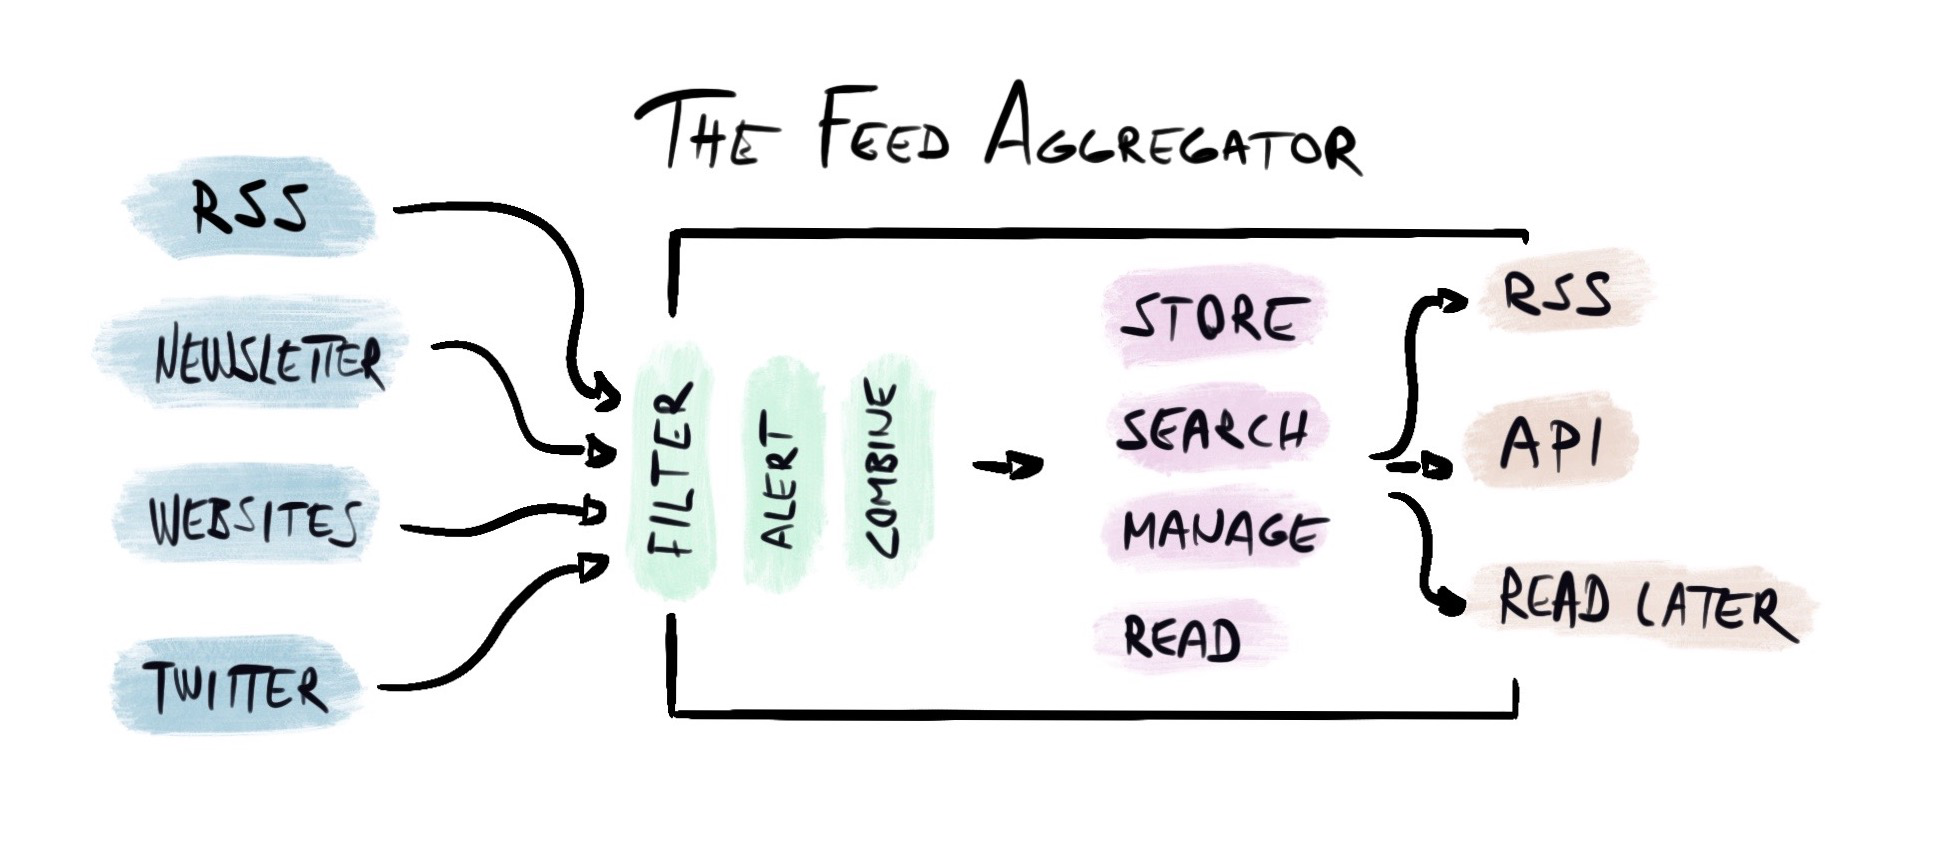 Feed aggregator essential features